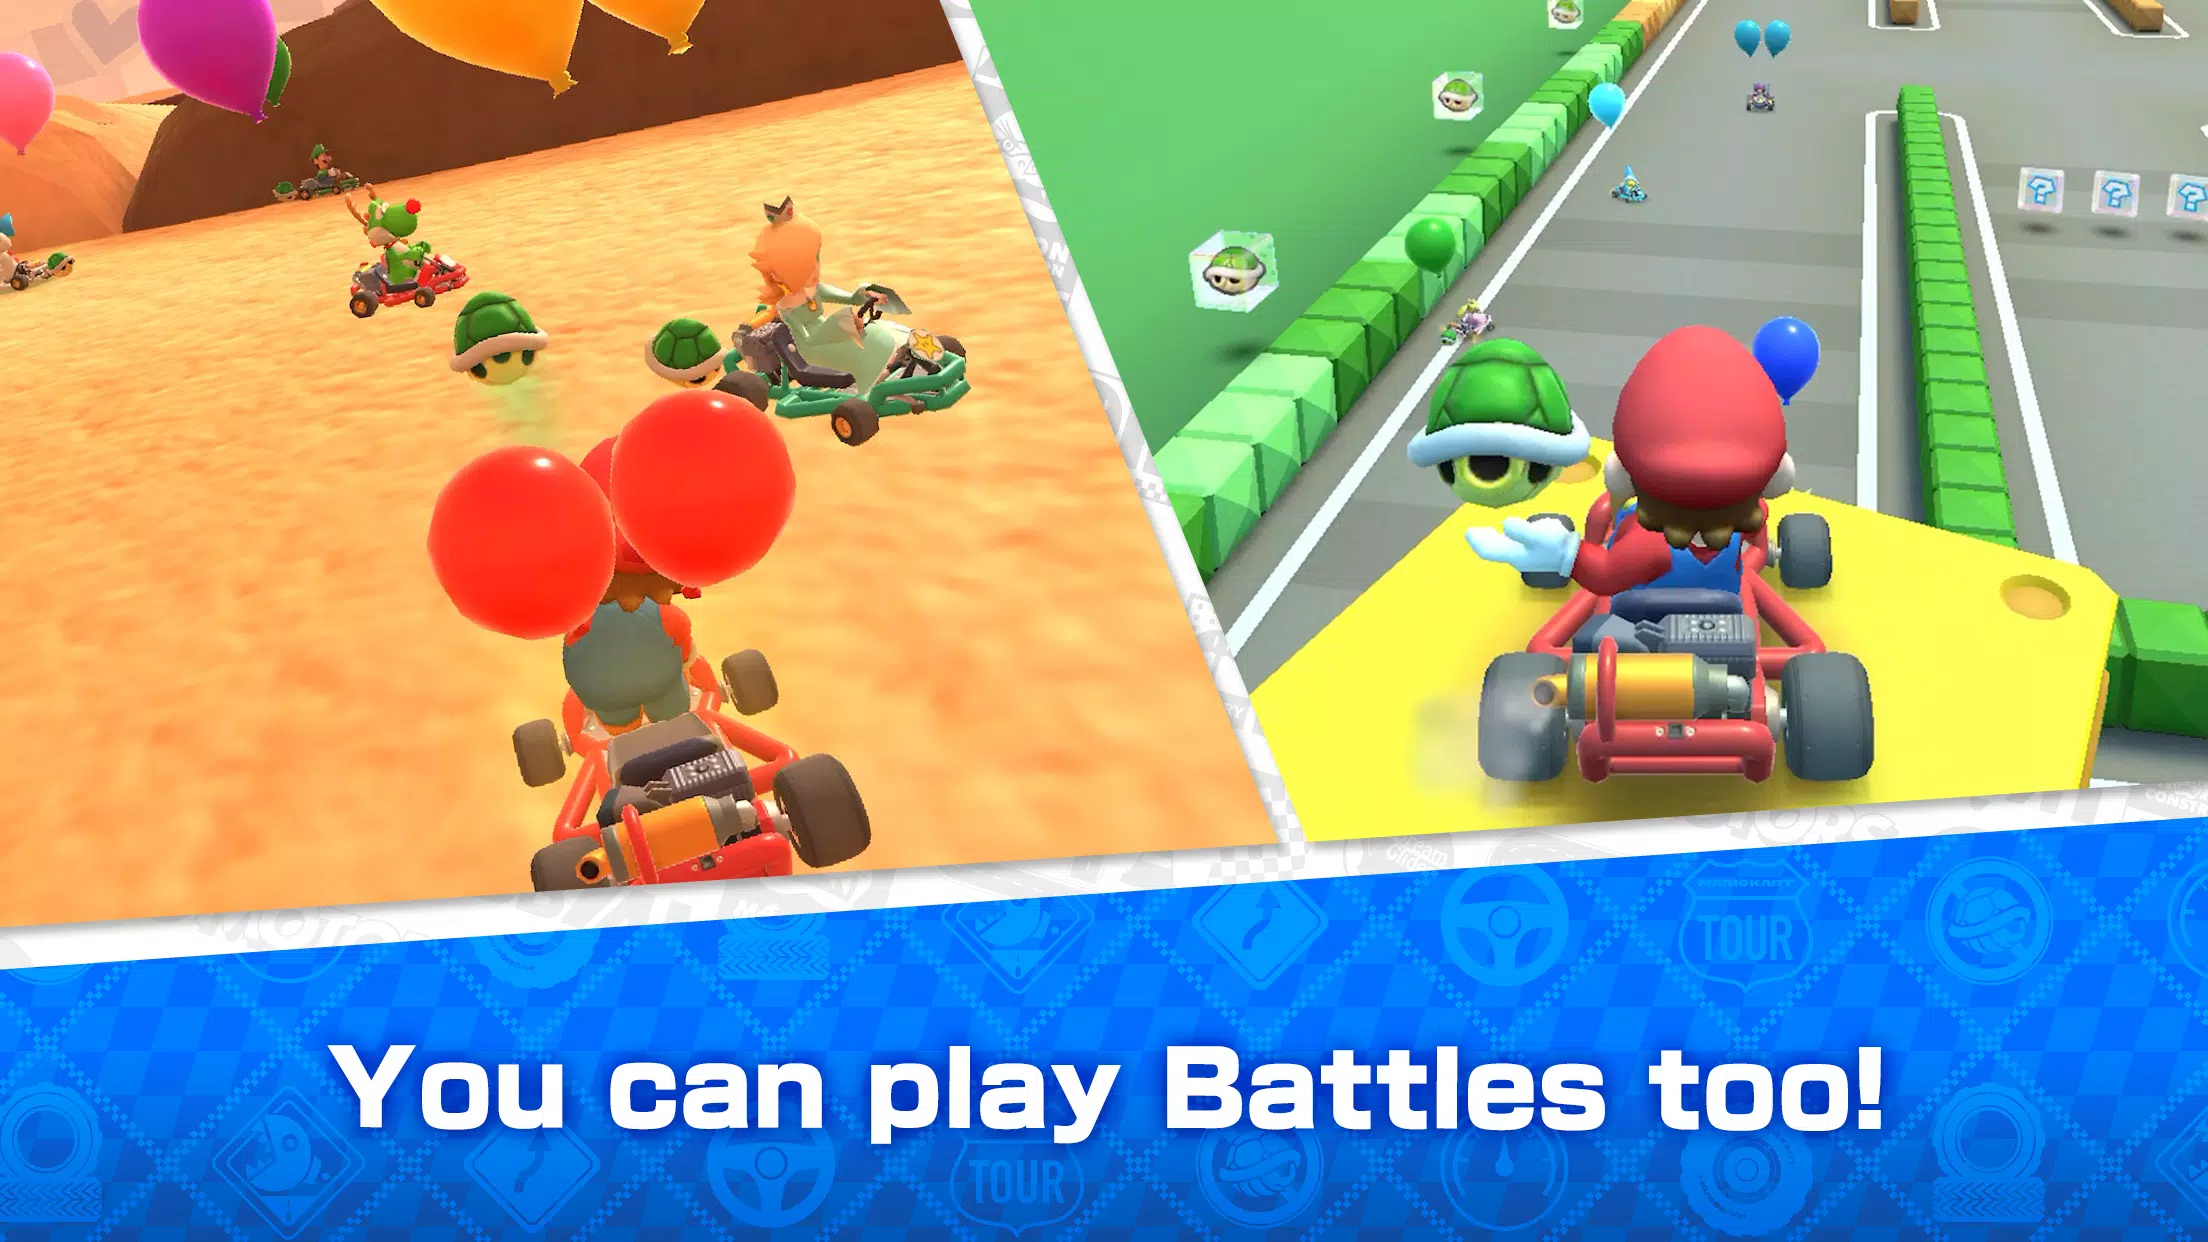 Mario Kart APK for Android Download